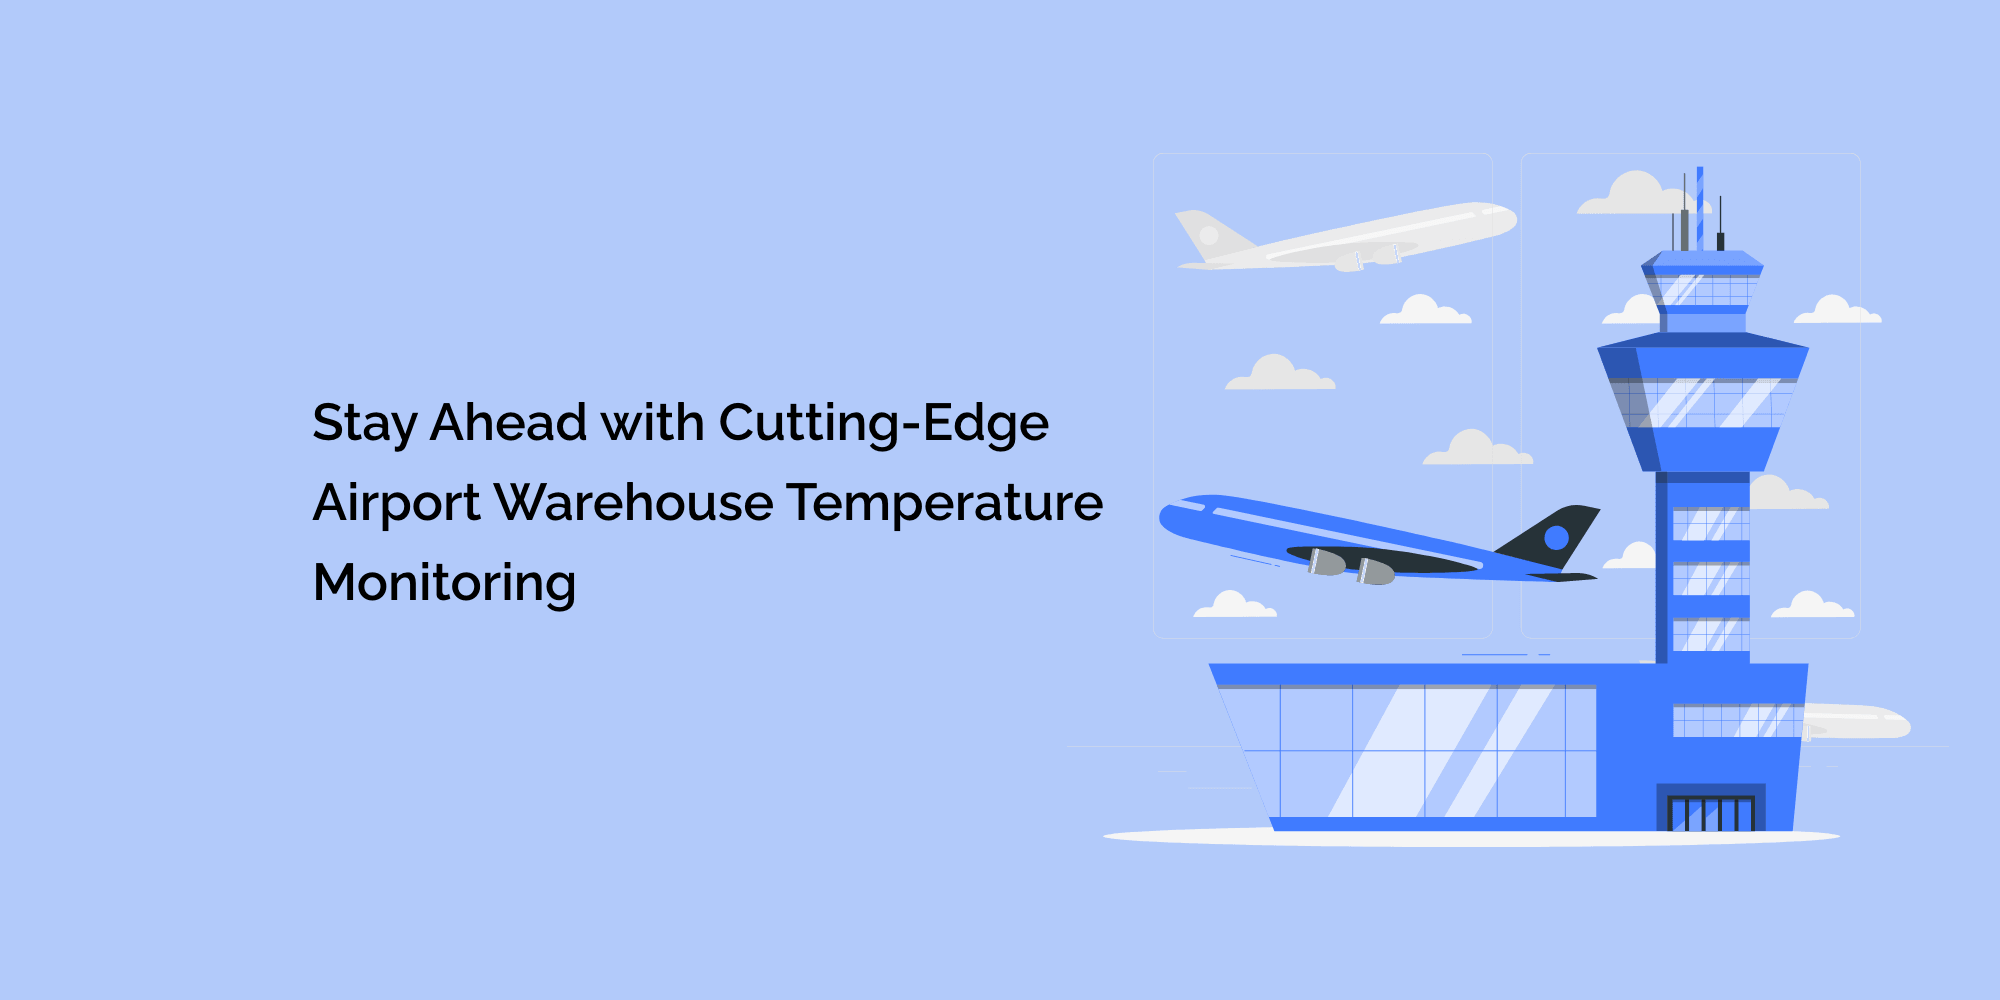 Stay Ahead with Cutting-Edge Airport Warehouse Temperature Monitoring